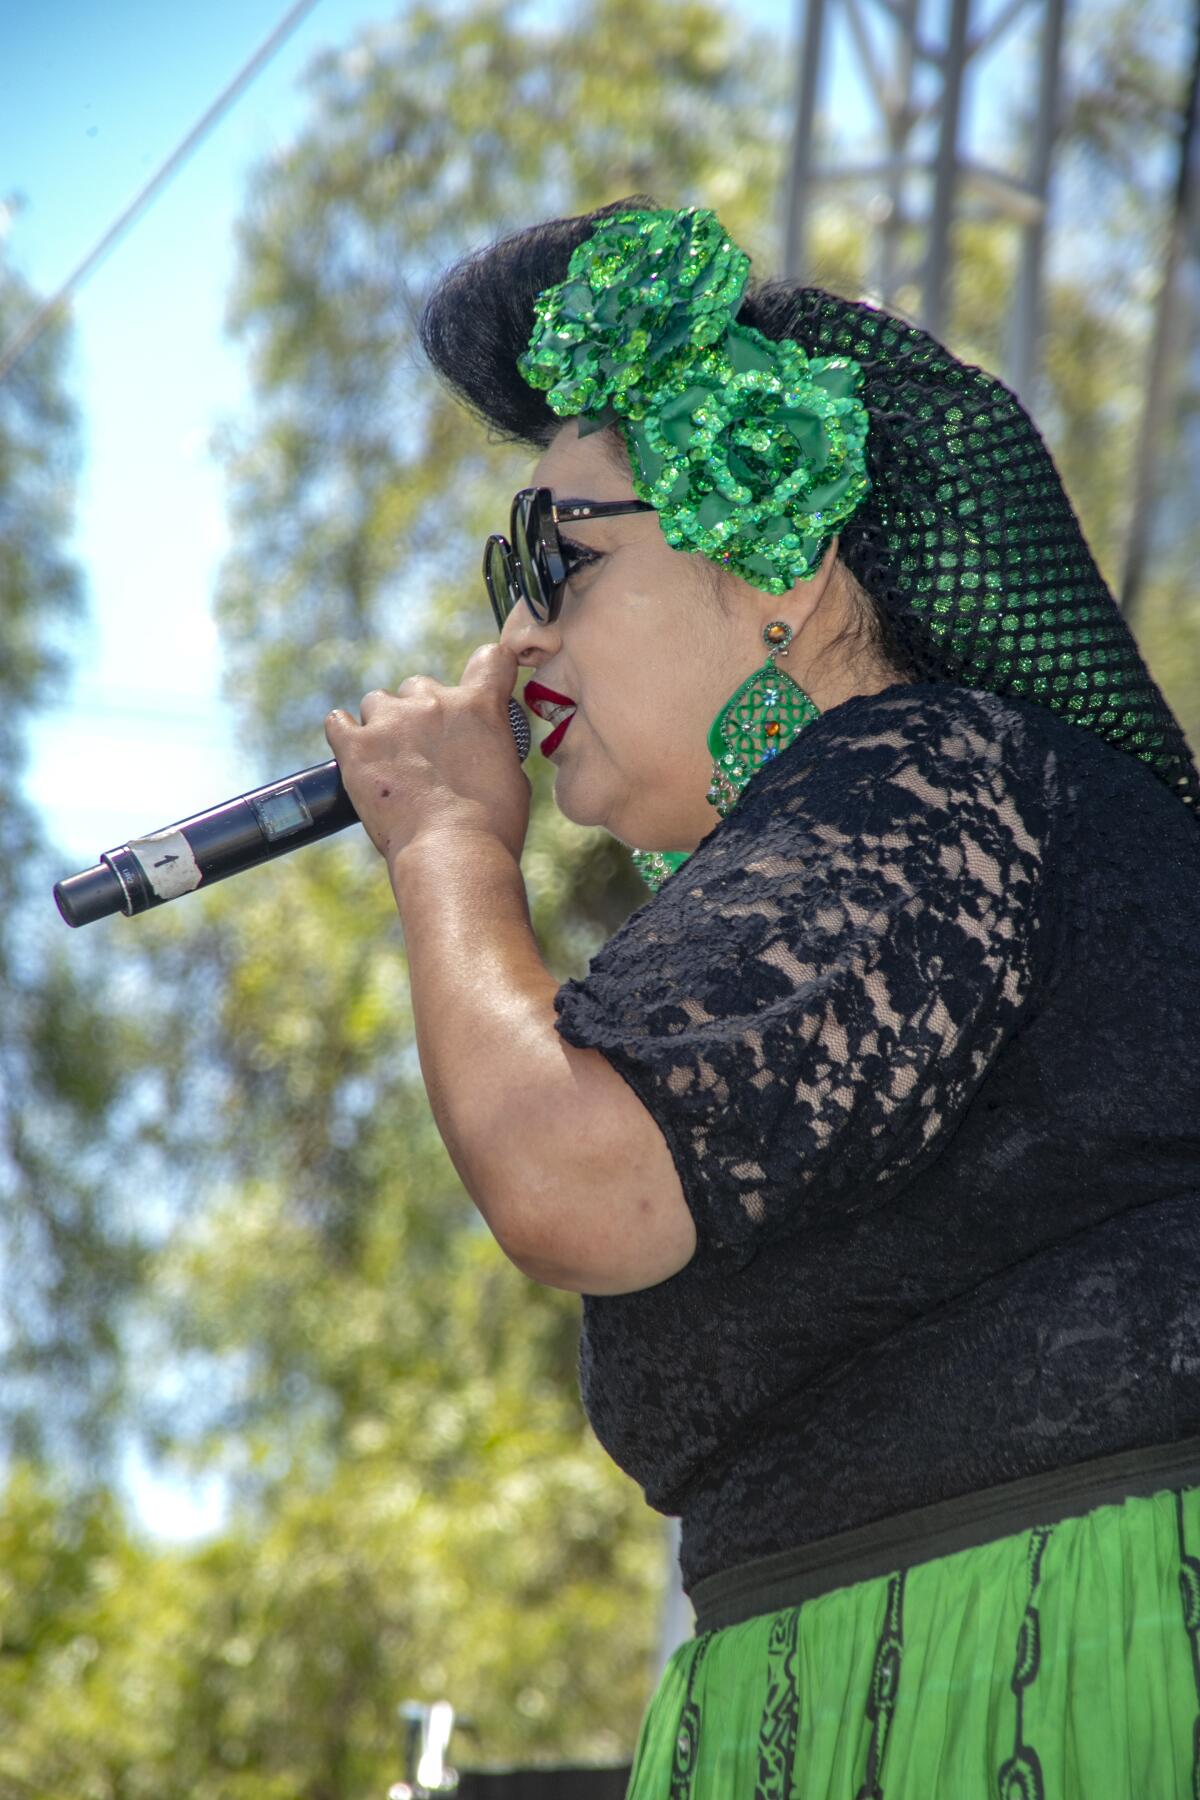 Vicky Tafoya sings along with the Big Beat band at the Chicano Heritage Festival.